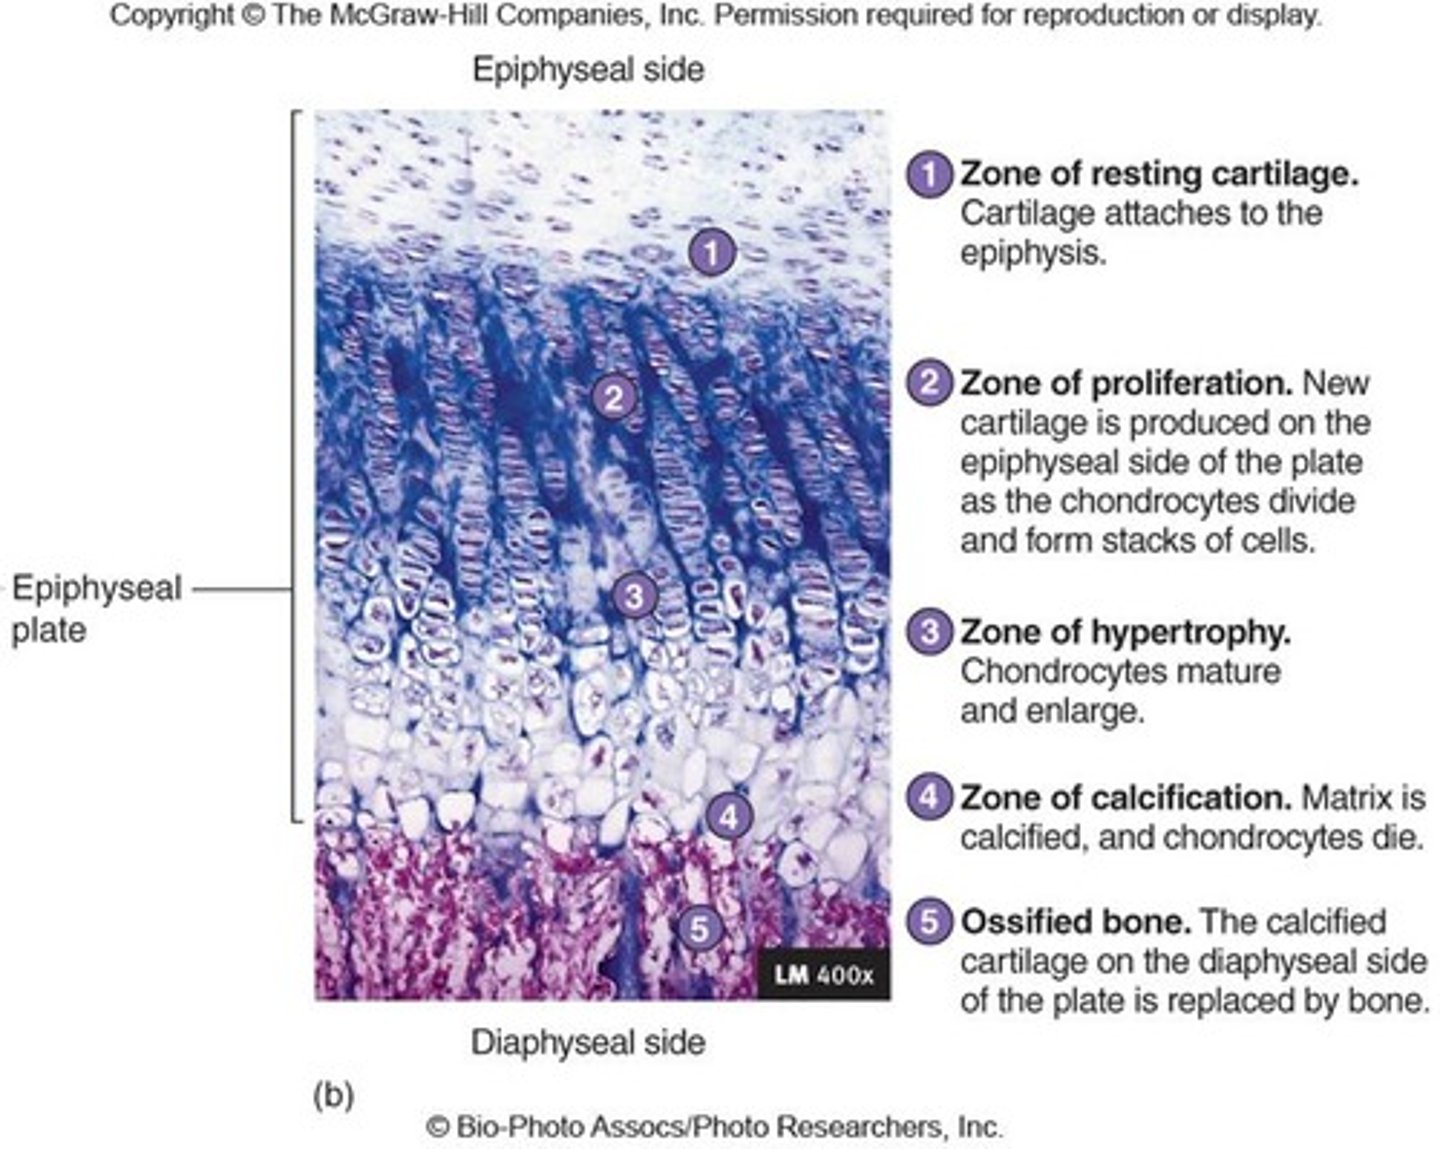 <p>- nearest the epiphysis and contains randomly arranged chondrocytes that do not divide rapidly</p><p>- anchors epiphyseal plate to tissue of epiphysis</p>